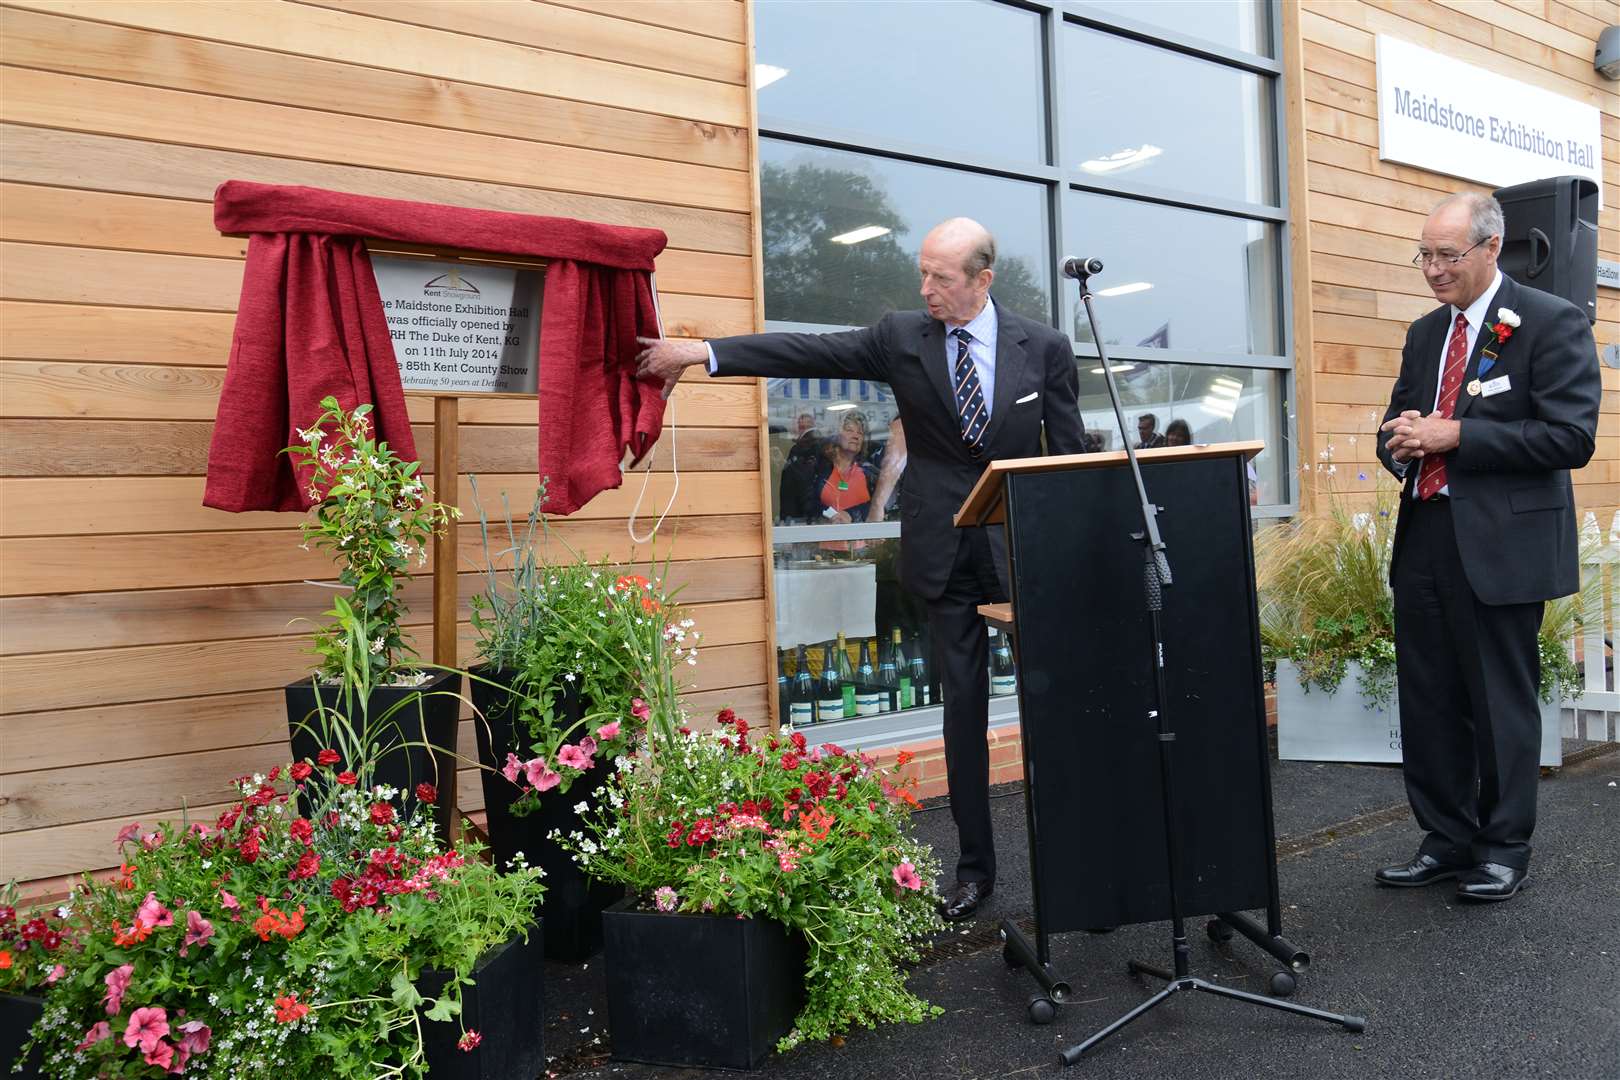 The Duke of Kent at the show in 2014